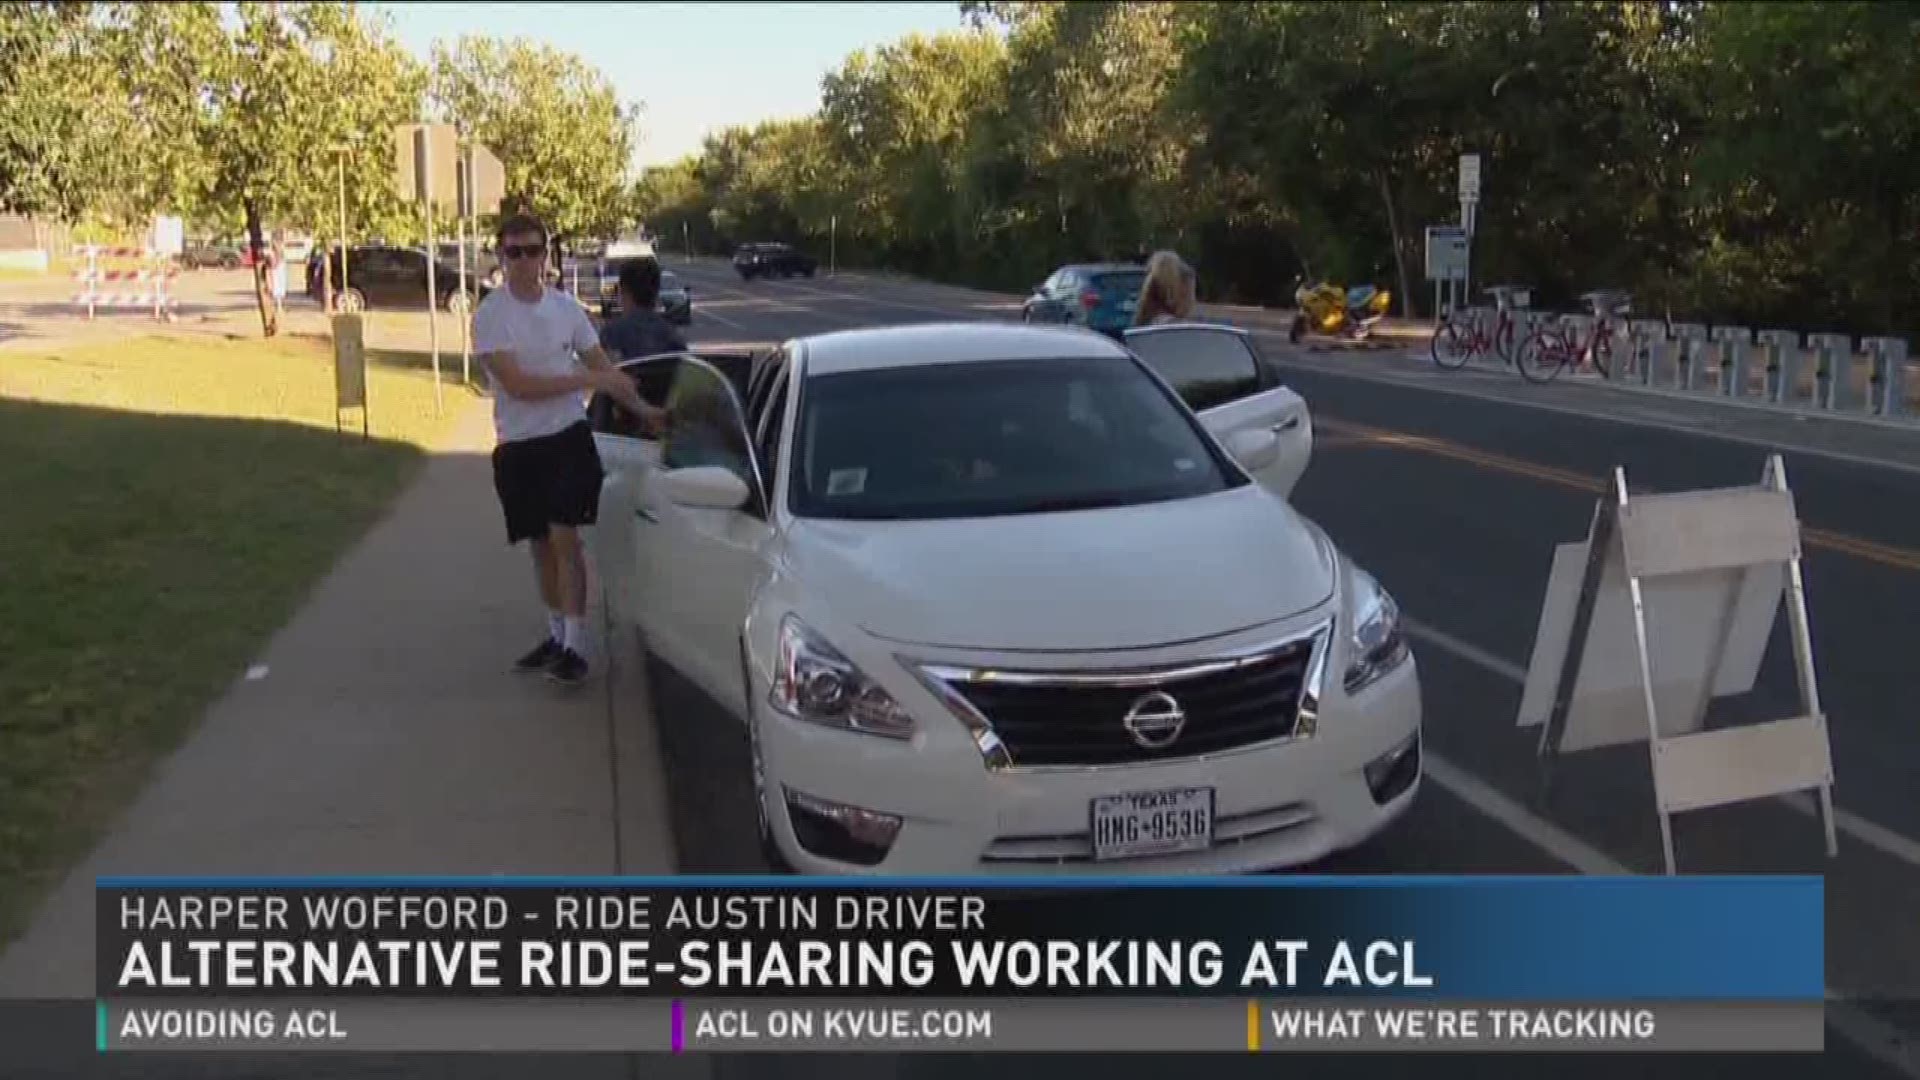 Alternative ride-hailing companies working at ACL